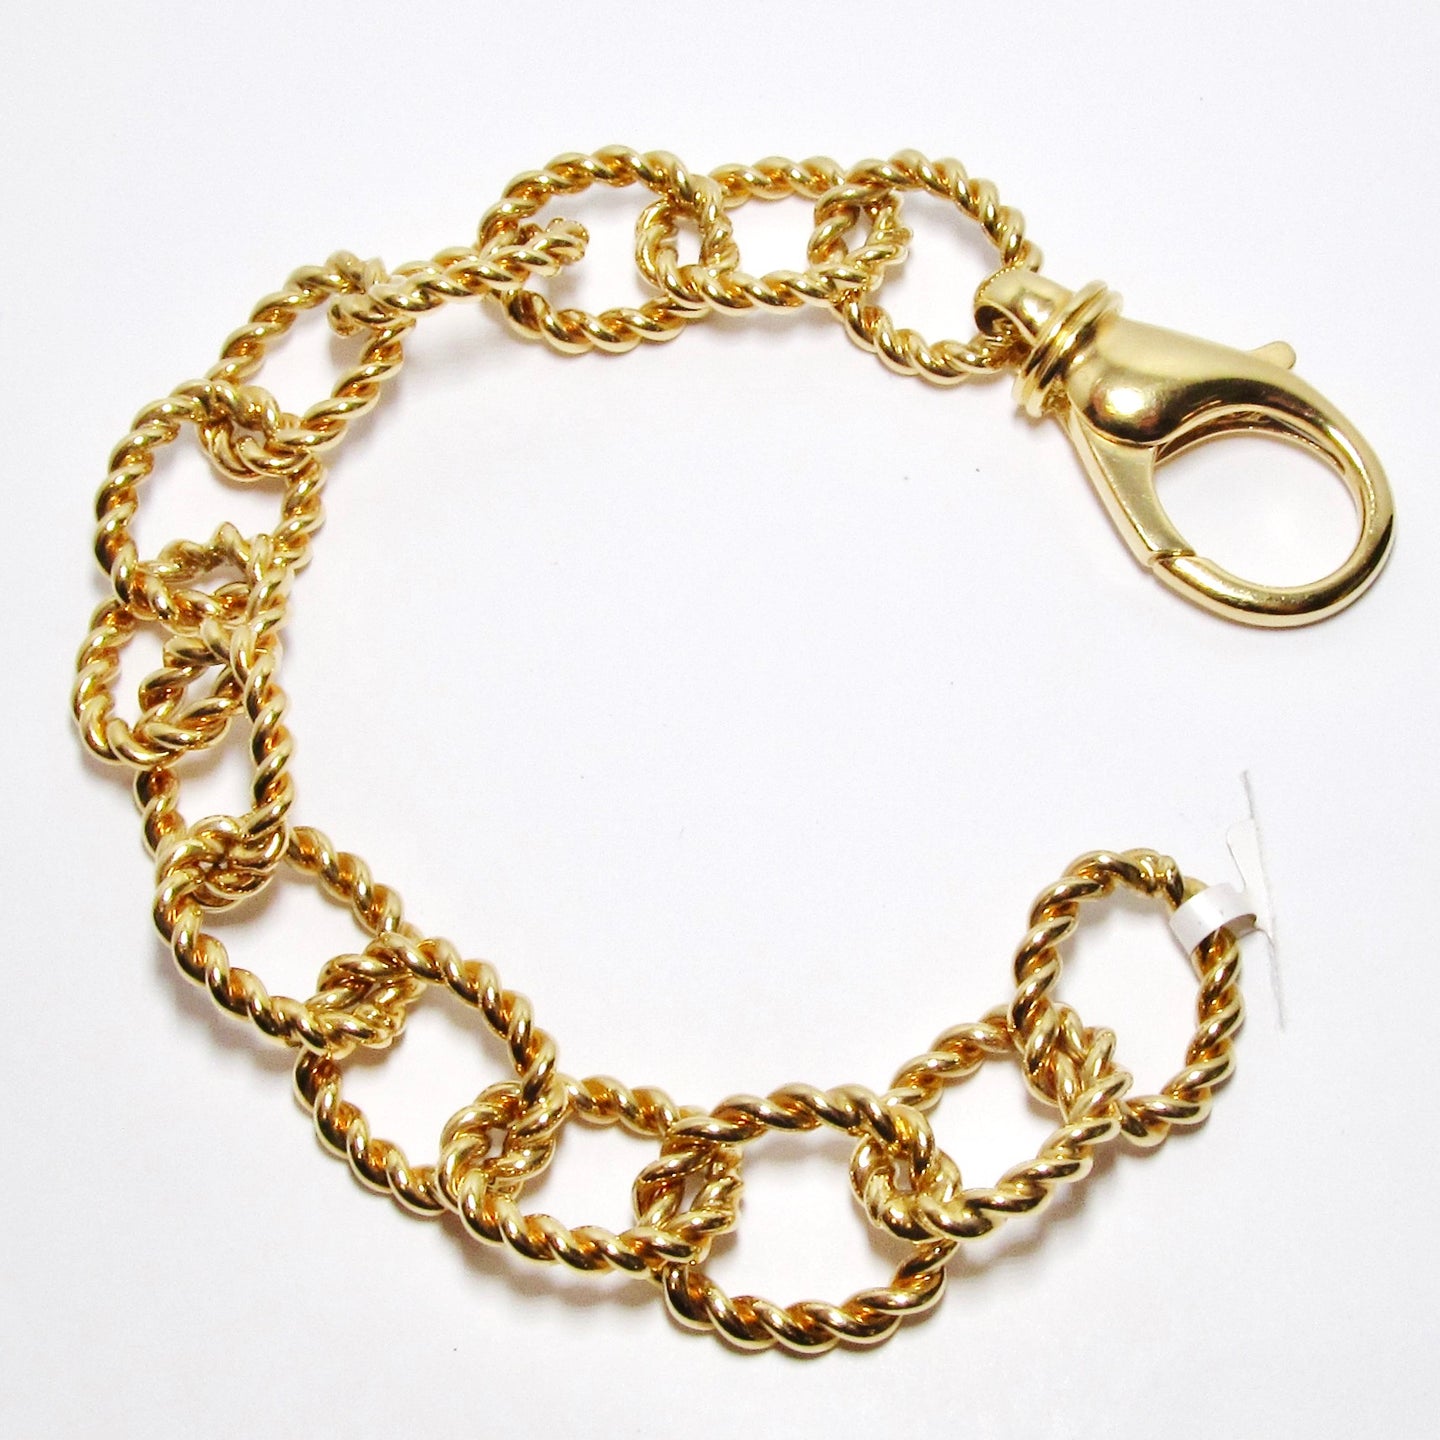 18k Yellow Gold Oval Twisted Link Bracelet w/ Lobster Claw